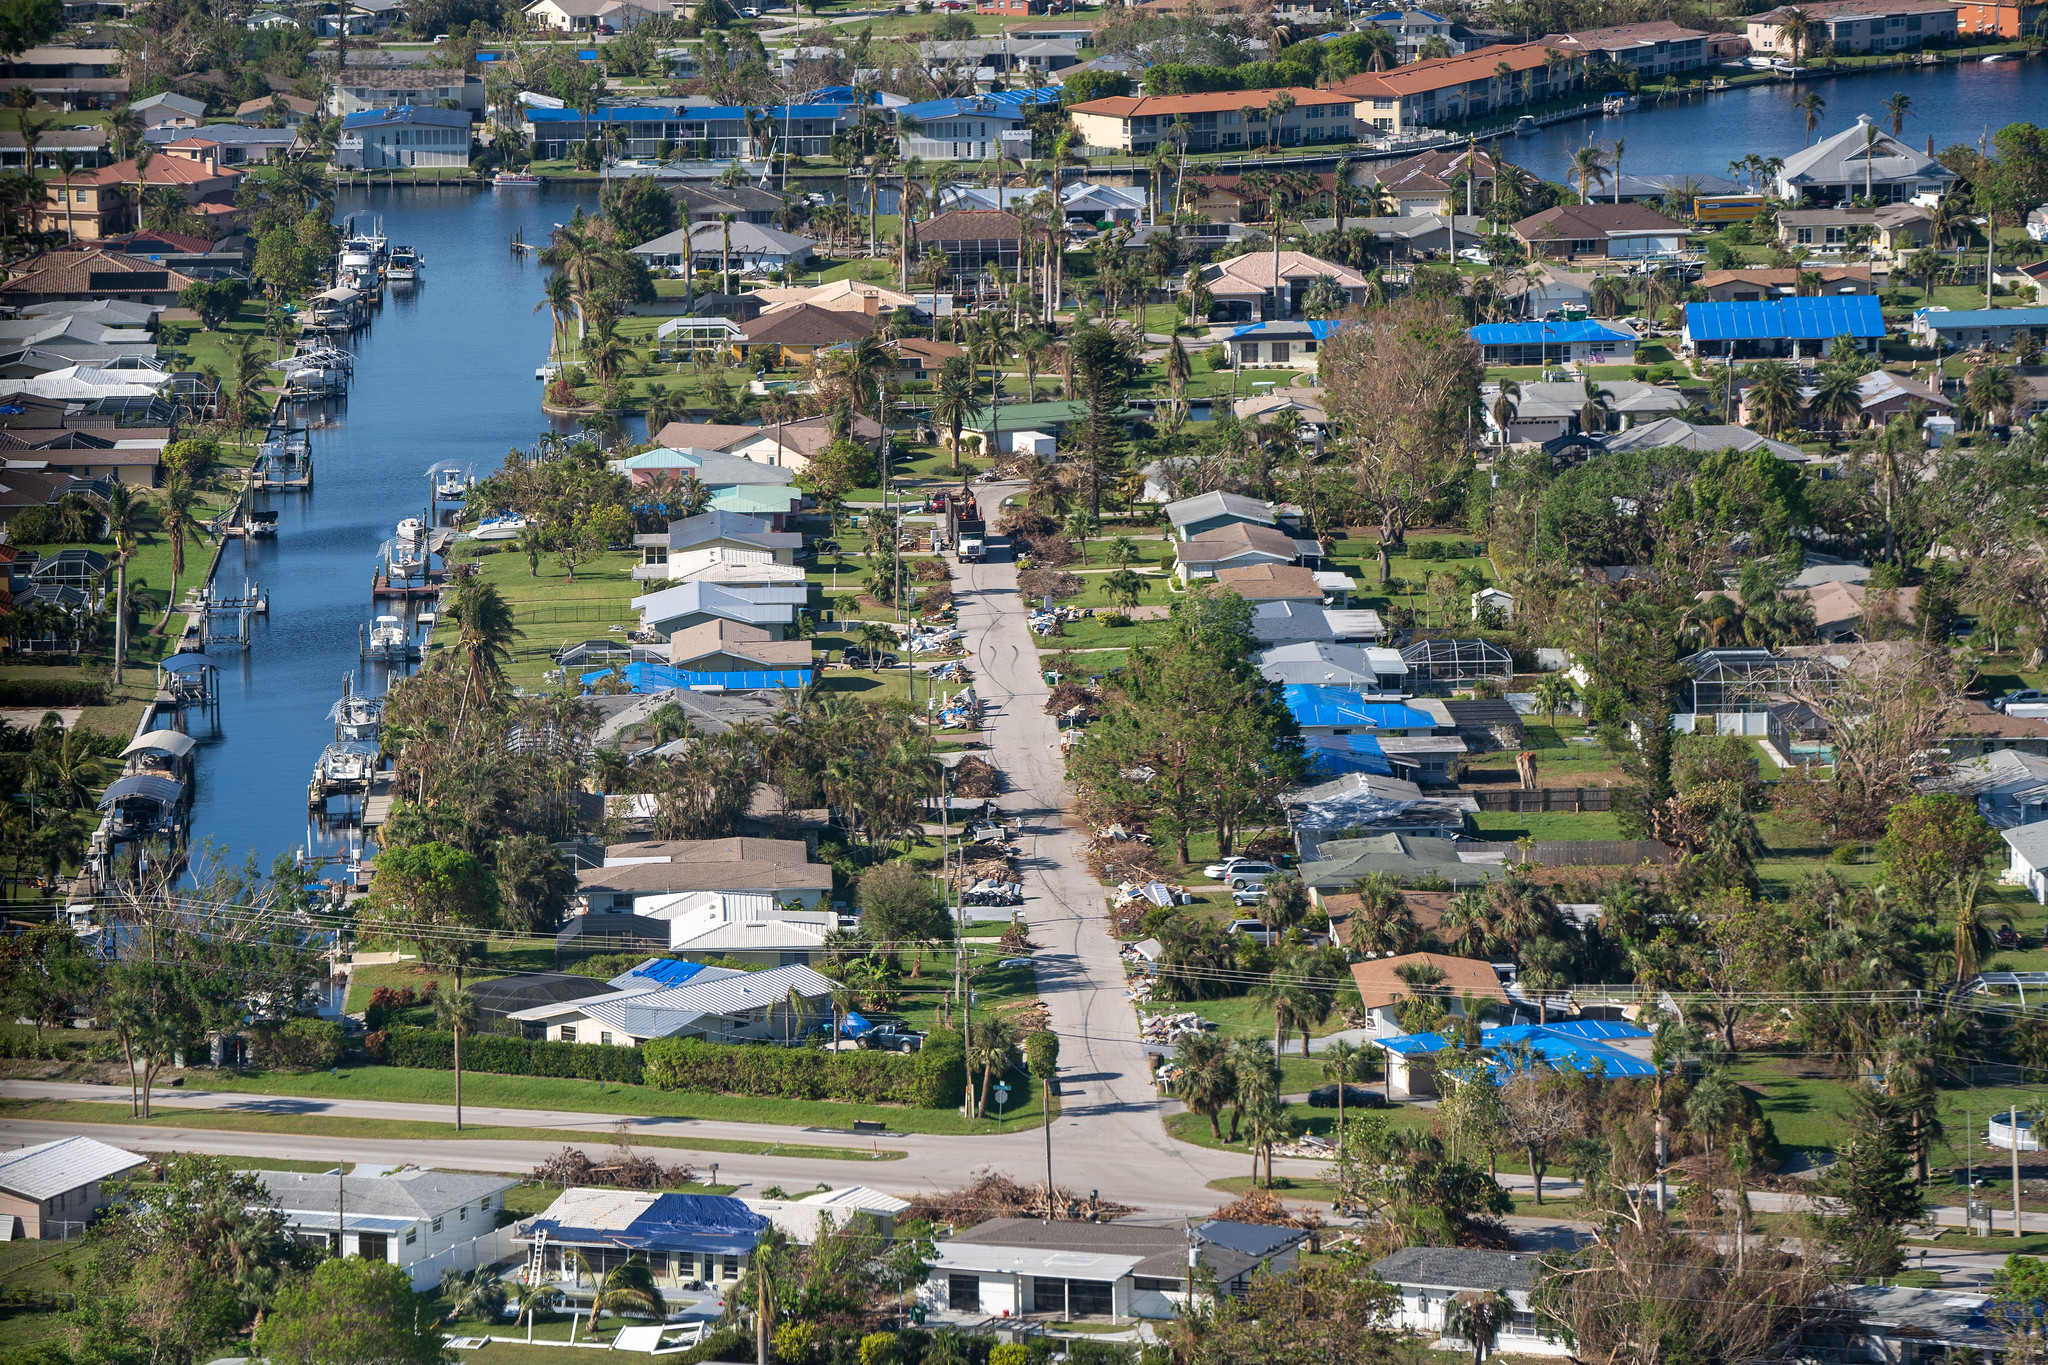 Florida’s Property/Casualty Insurance Market Shows Signs of Recovery Amid Reforms